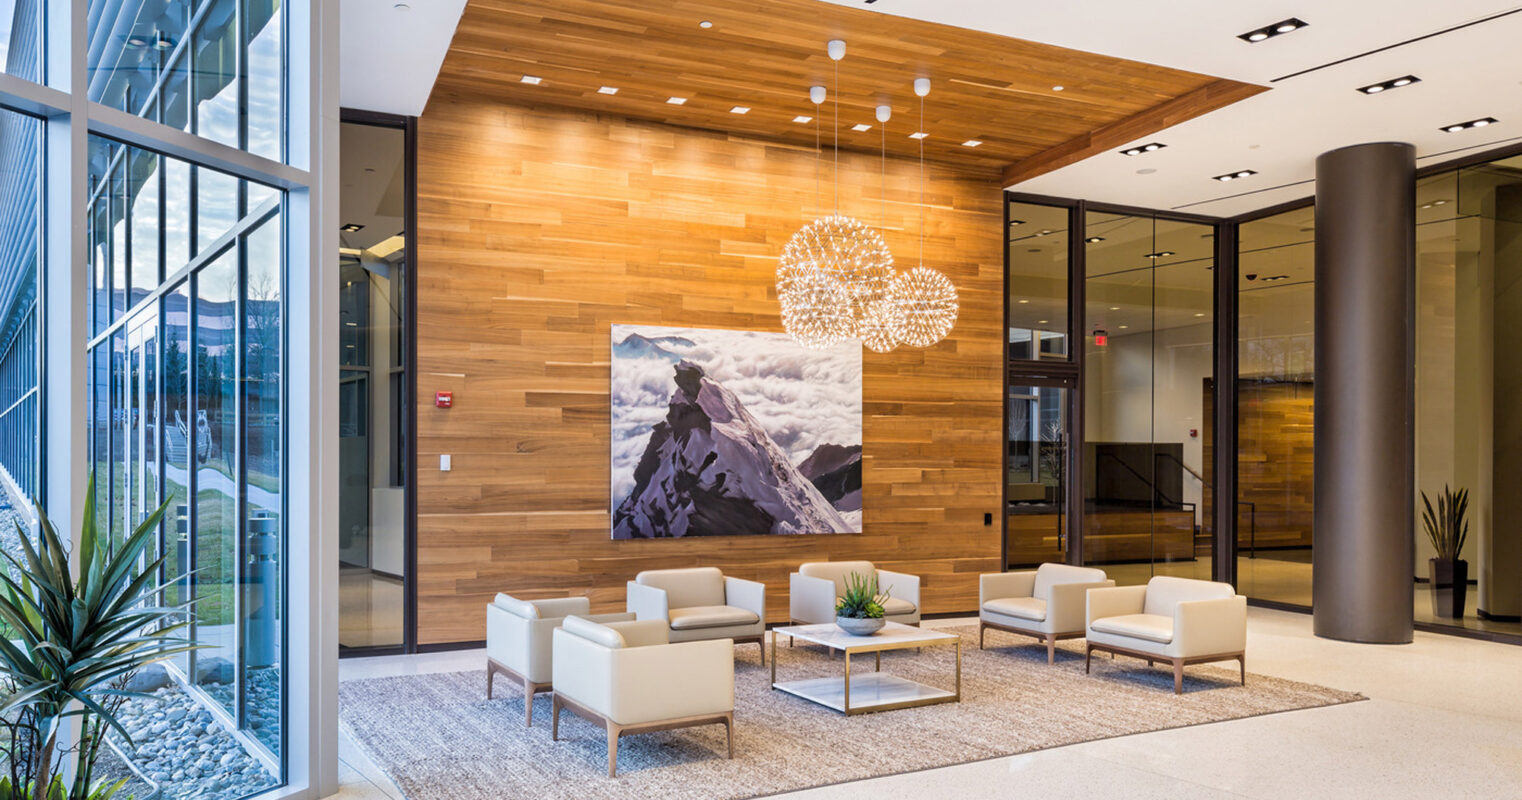 Modern corporate lobby featuring a warm wood accent wall with integrated lighting, flanked by a large mountain landscape artwork. Sleek beige armchairs and minimalist sofas are arranged on a neutral-toned rug, beneath spherical pendant lights, creating a welcoming atmosphere.